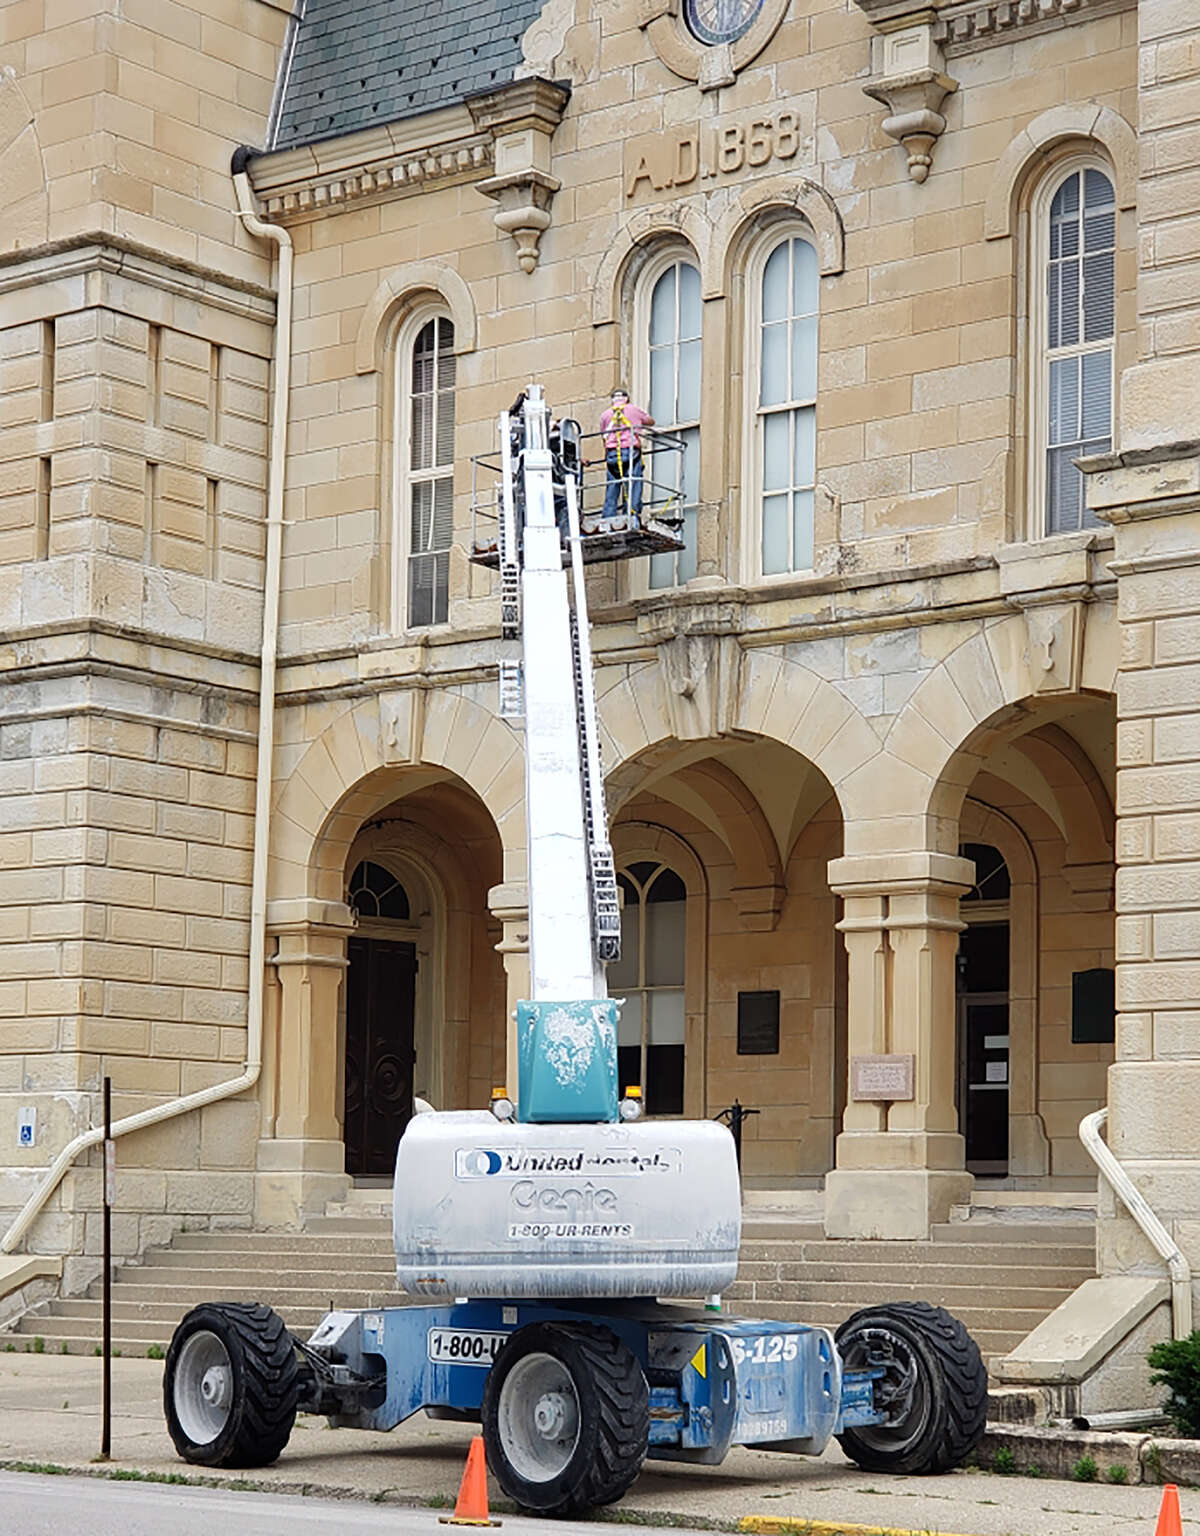 A representative of White & Borgognoni Architects of Carbondale, under the direction of partner and principal Gail White, uses a lift to inspect windows on the Morgan County Courthouse. Commissioner Brad Zeller said the county asked the architectural firm to do a study of the building's windows to determine what they need in the way of caulking and other repairs to keep the building in good condition.